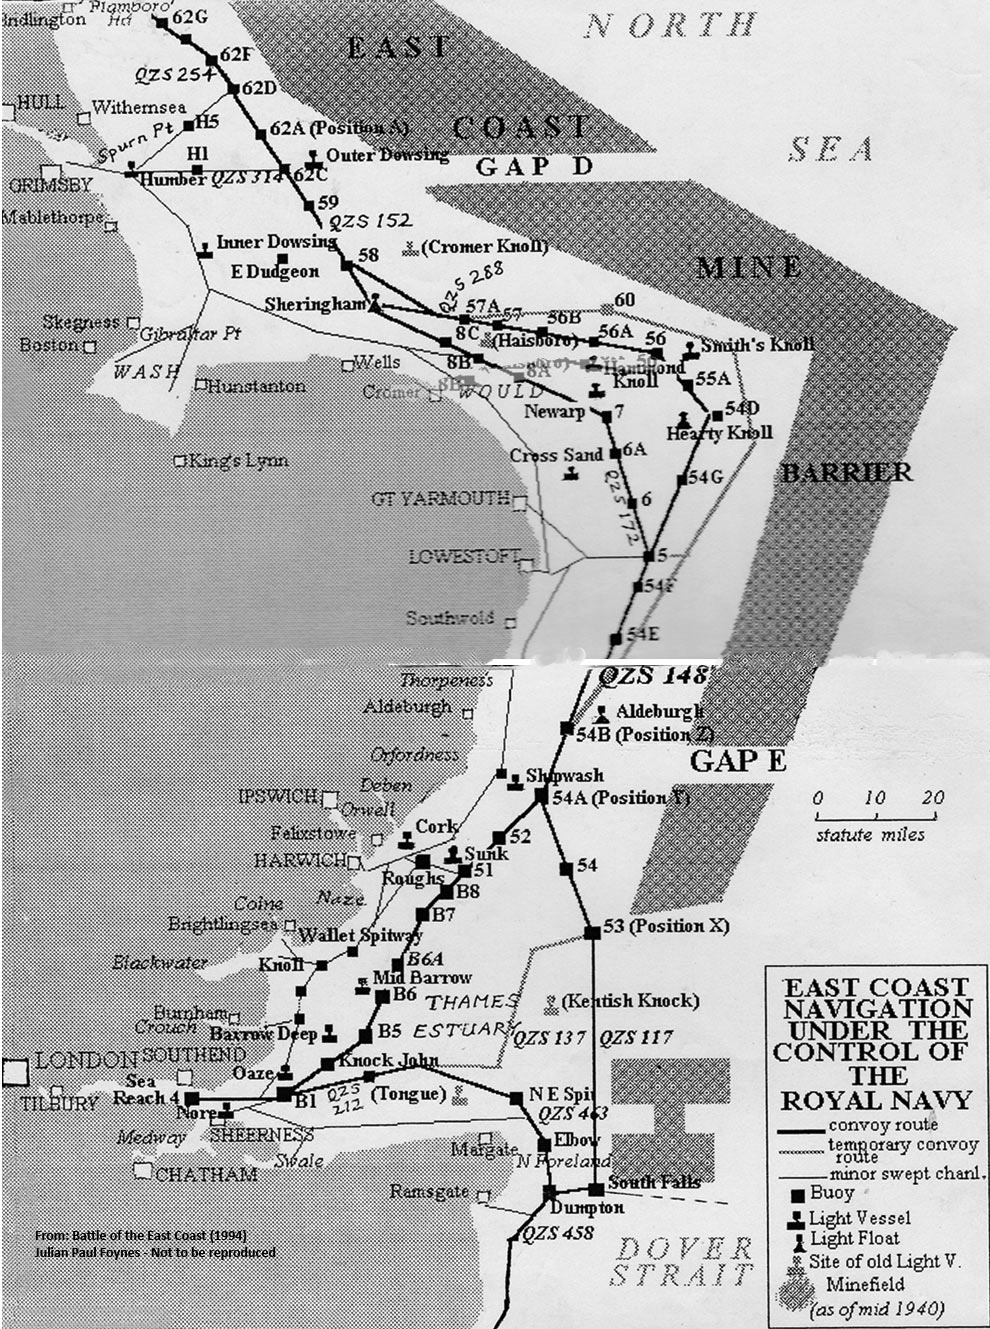 Map of East Coast showing Convoy royts in 1940